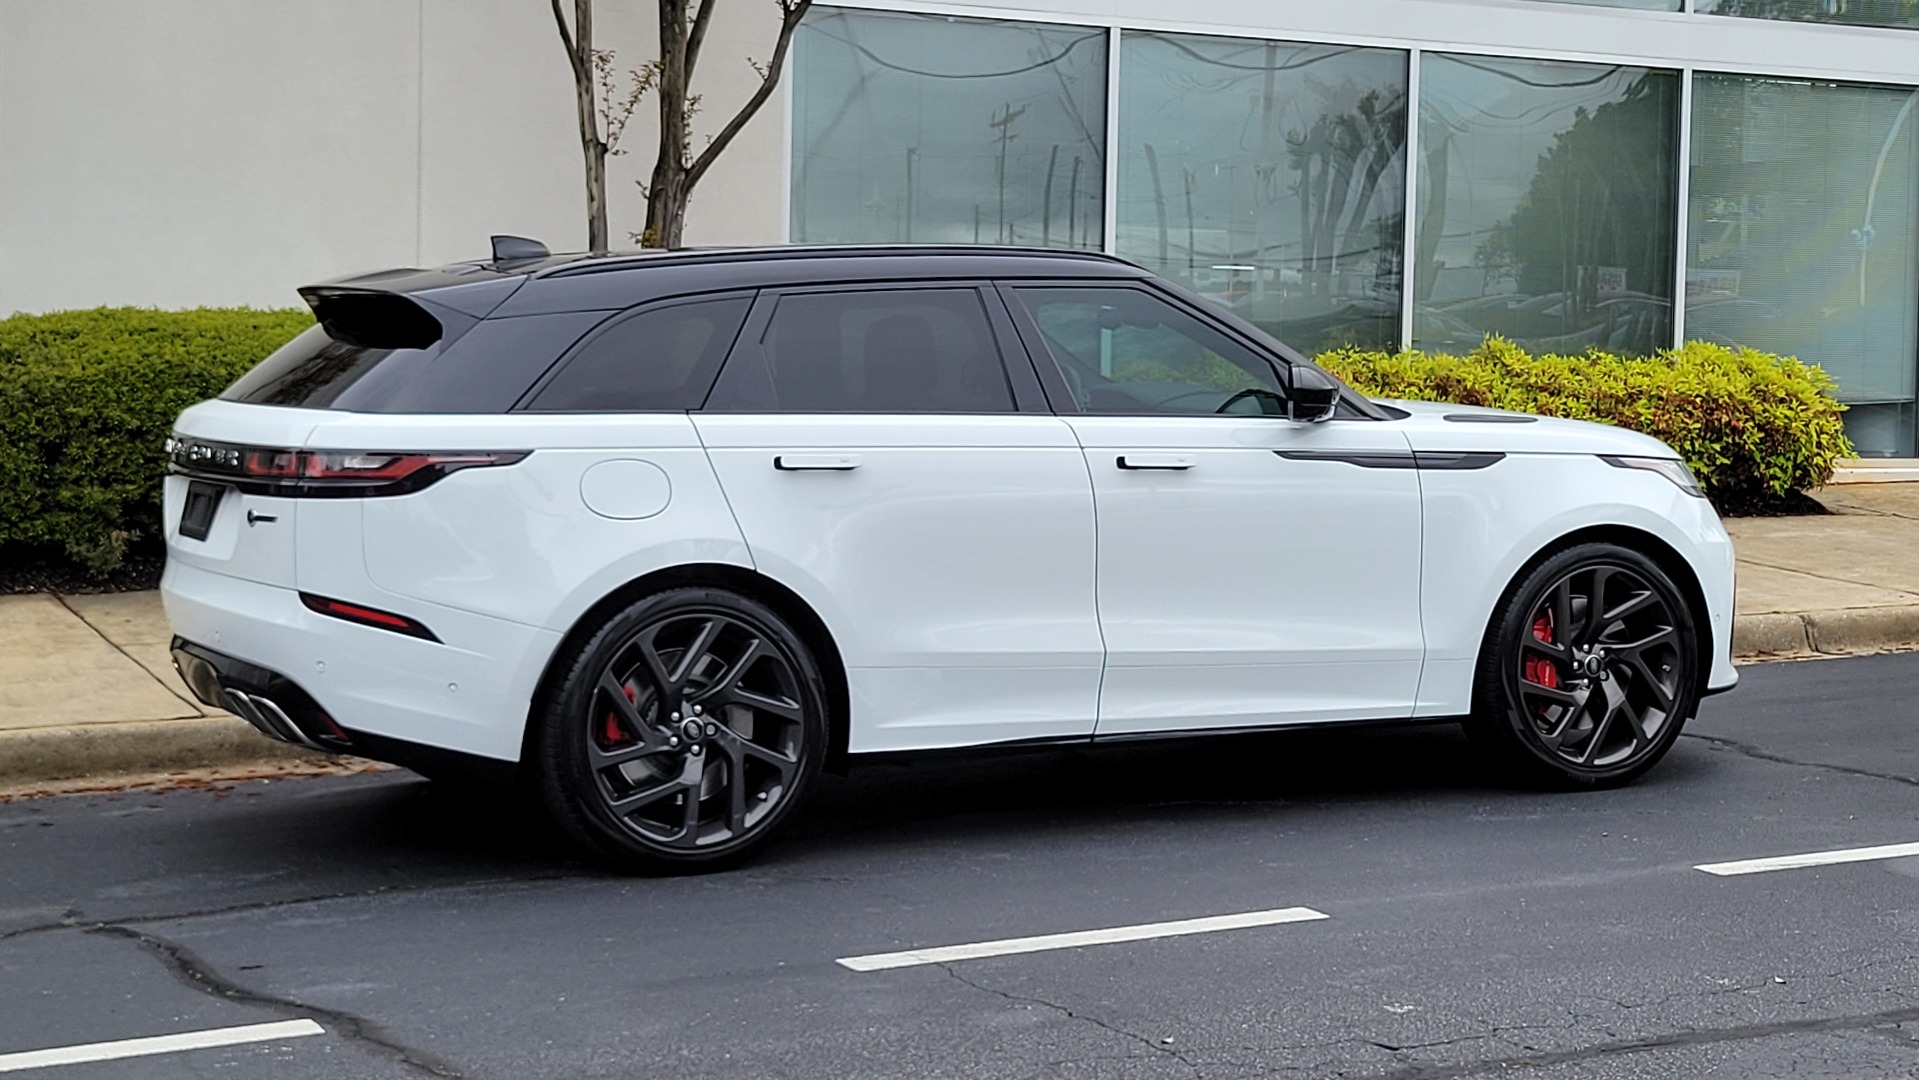 Used 2020 Land Rover RANGE ROVER VELAR SVAUTOBIOGRAPHY DYNAMIC ED / NAV / SUNROOF for sale $95,495 at Formula Imports in Charlotte NC 28227 8